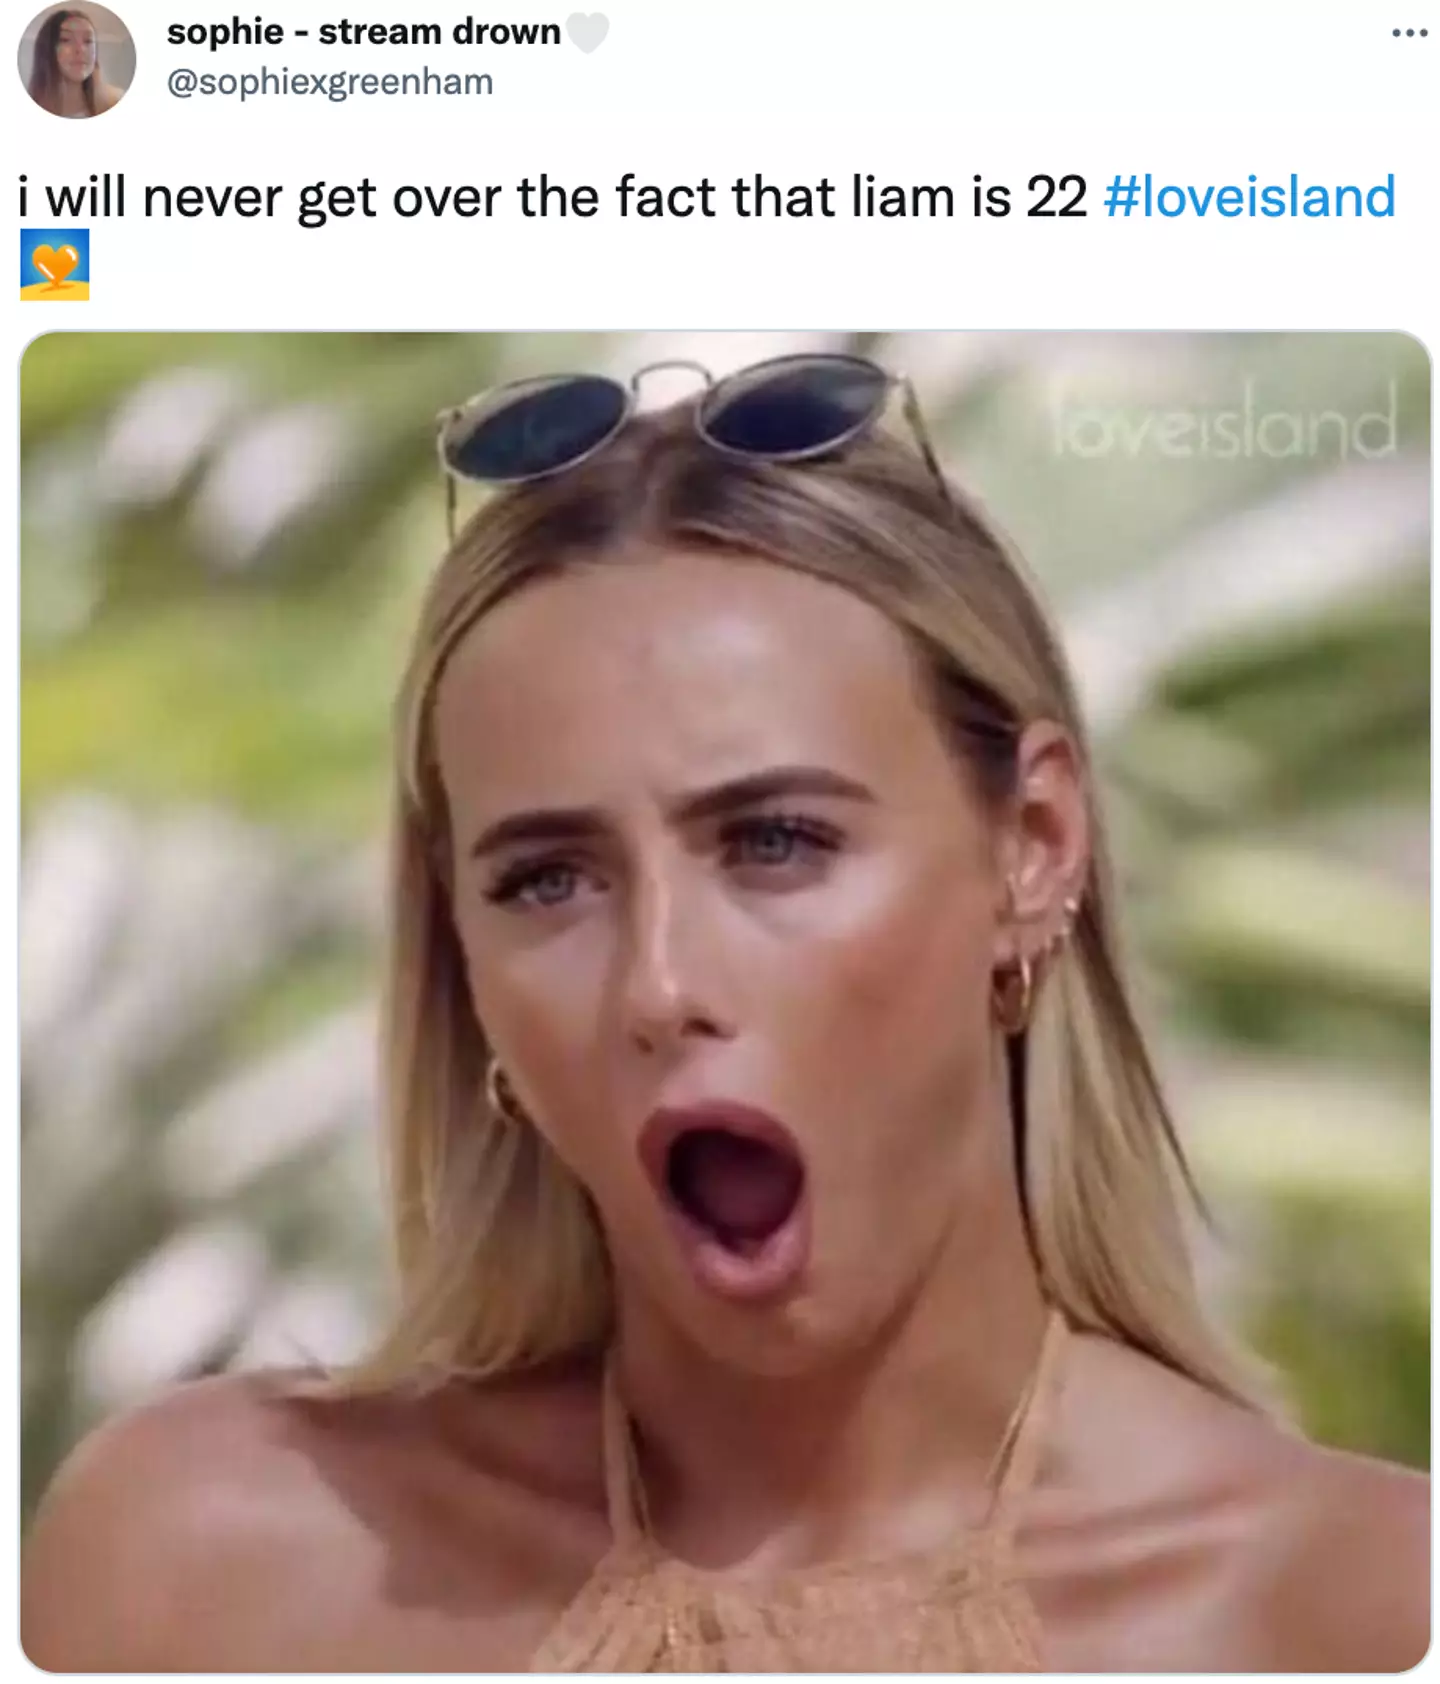 Love Island fans reacted to Liam's age on Twitter (